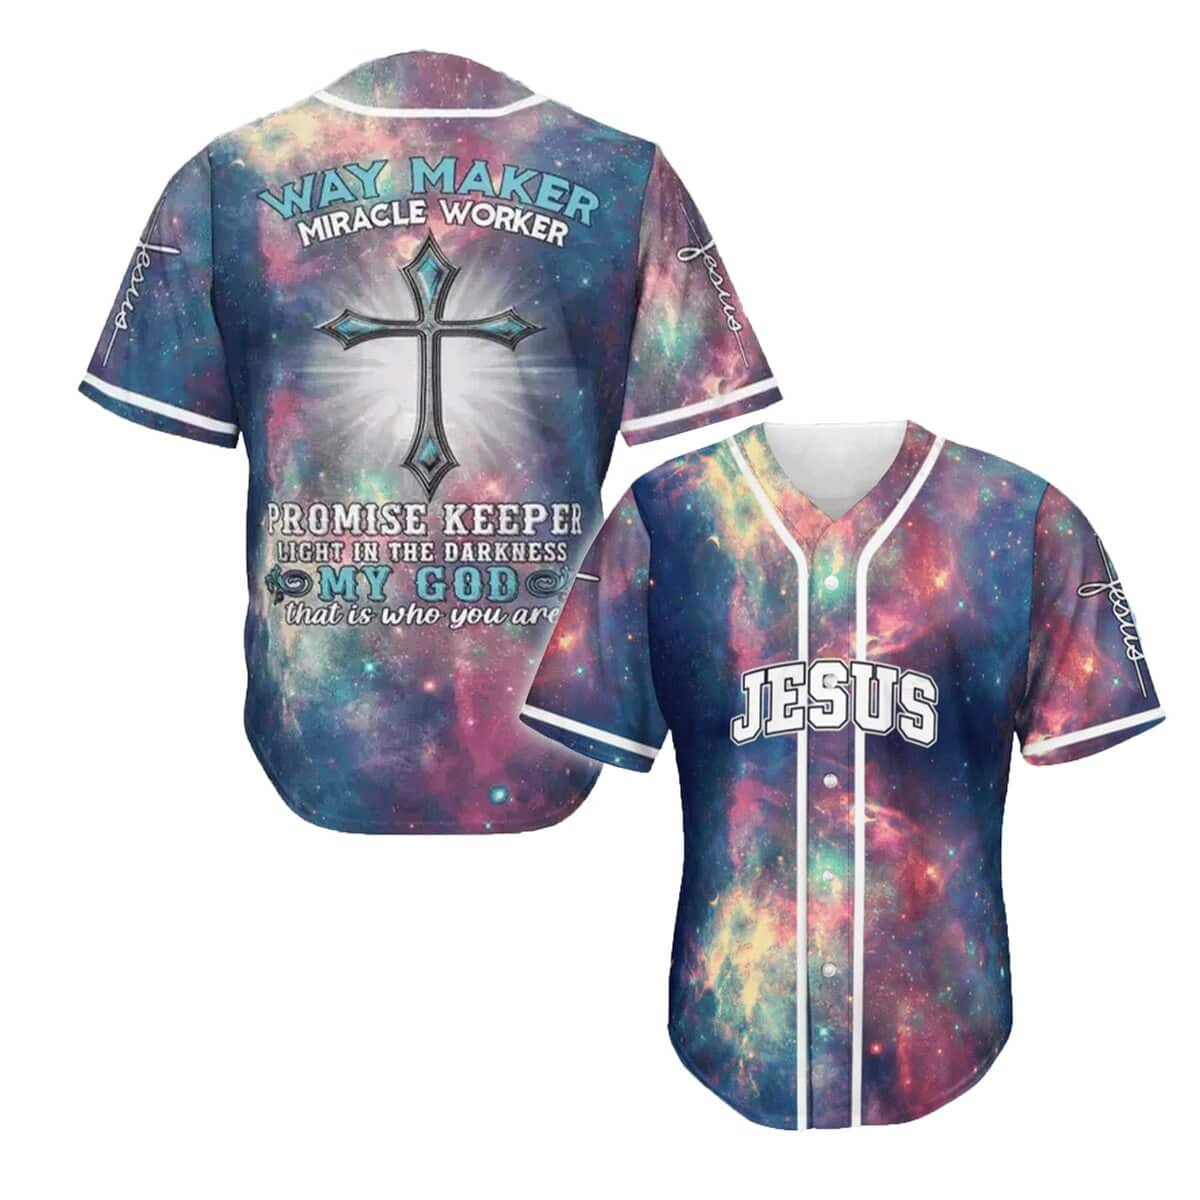 Jesus Faith And Crucifix Baseball Jersey Way Maker Miracle Worker Promise Keeper Best Christian Gift